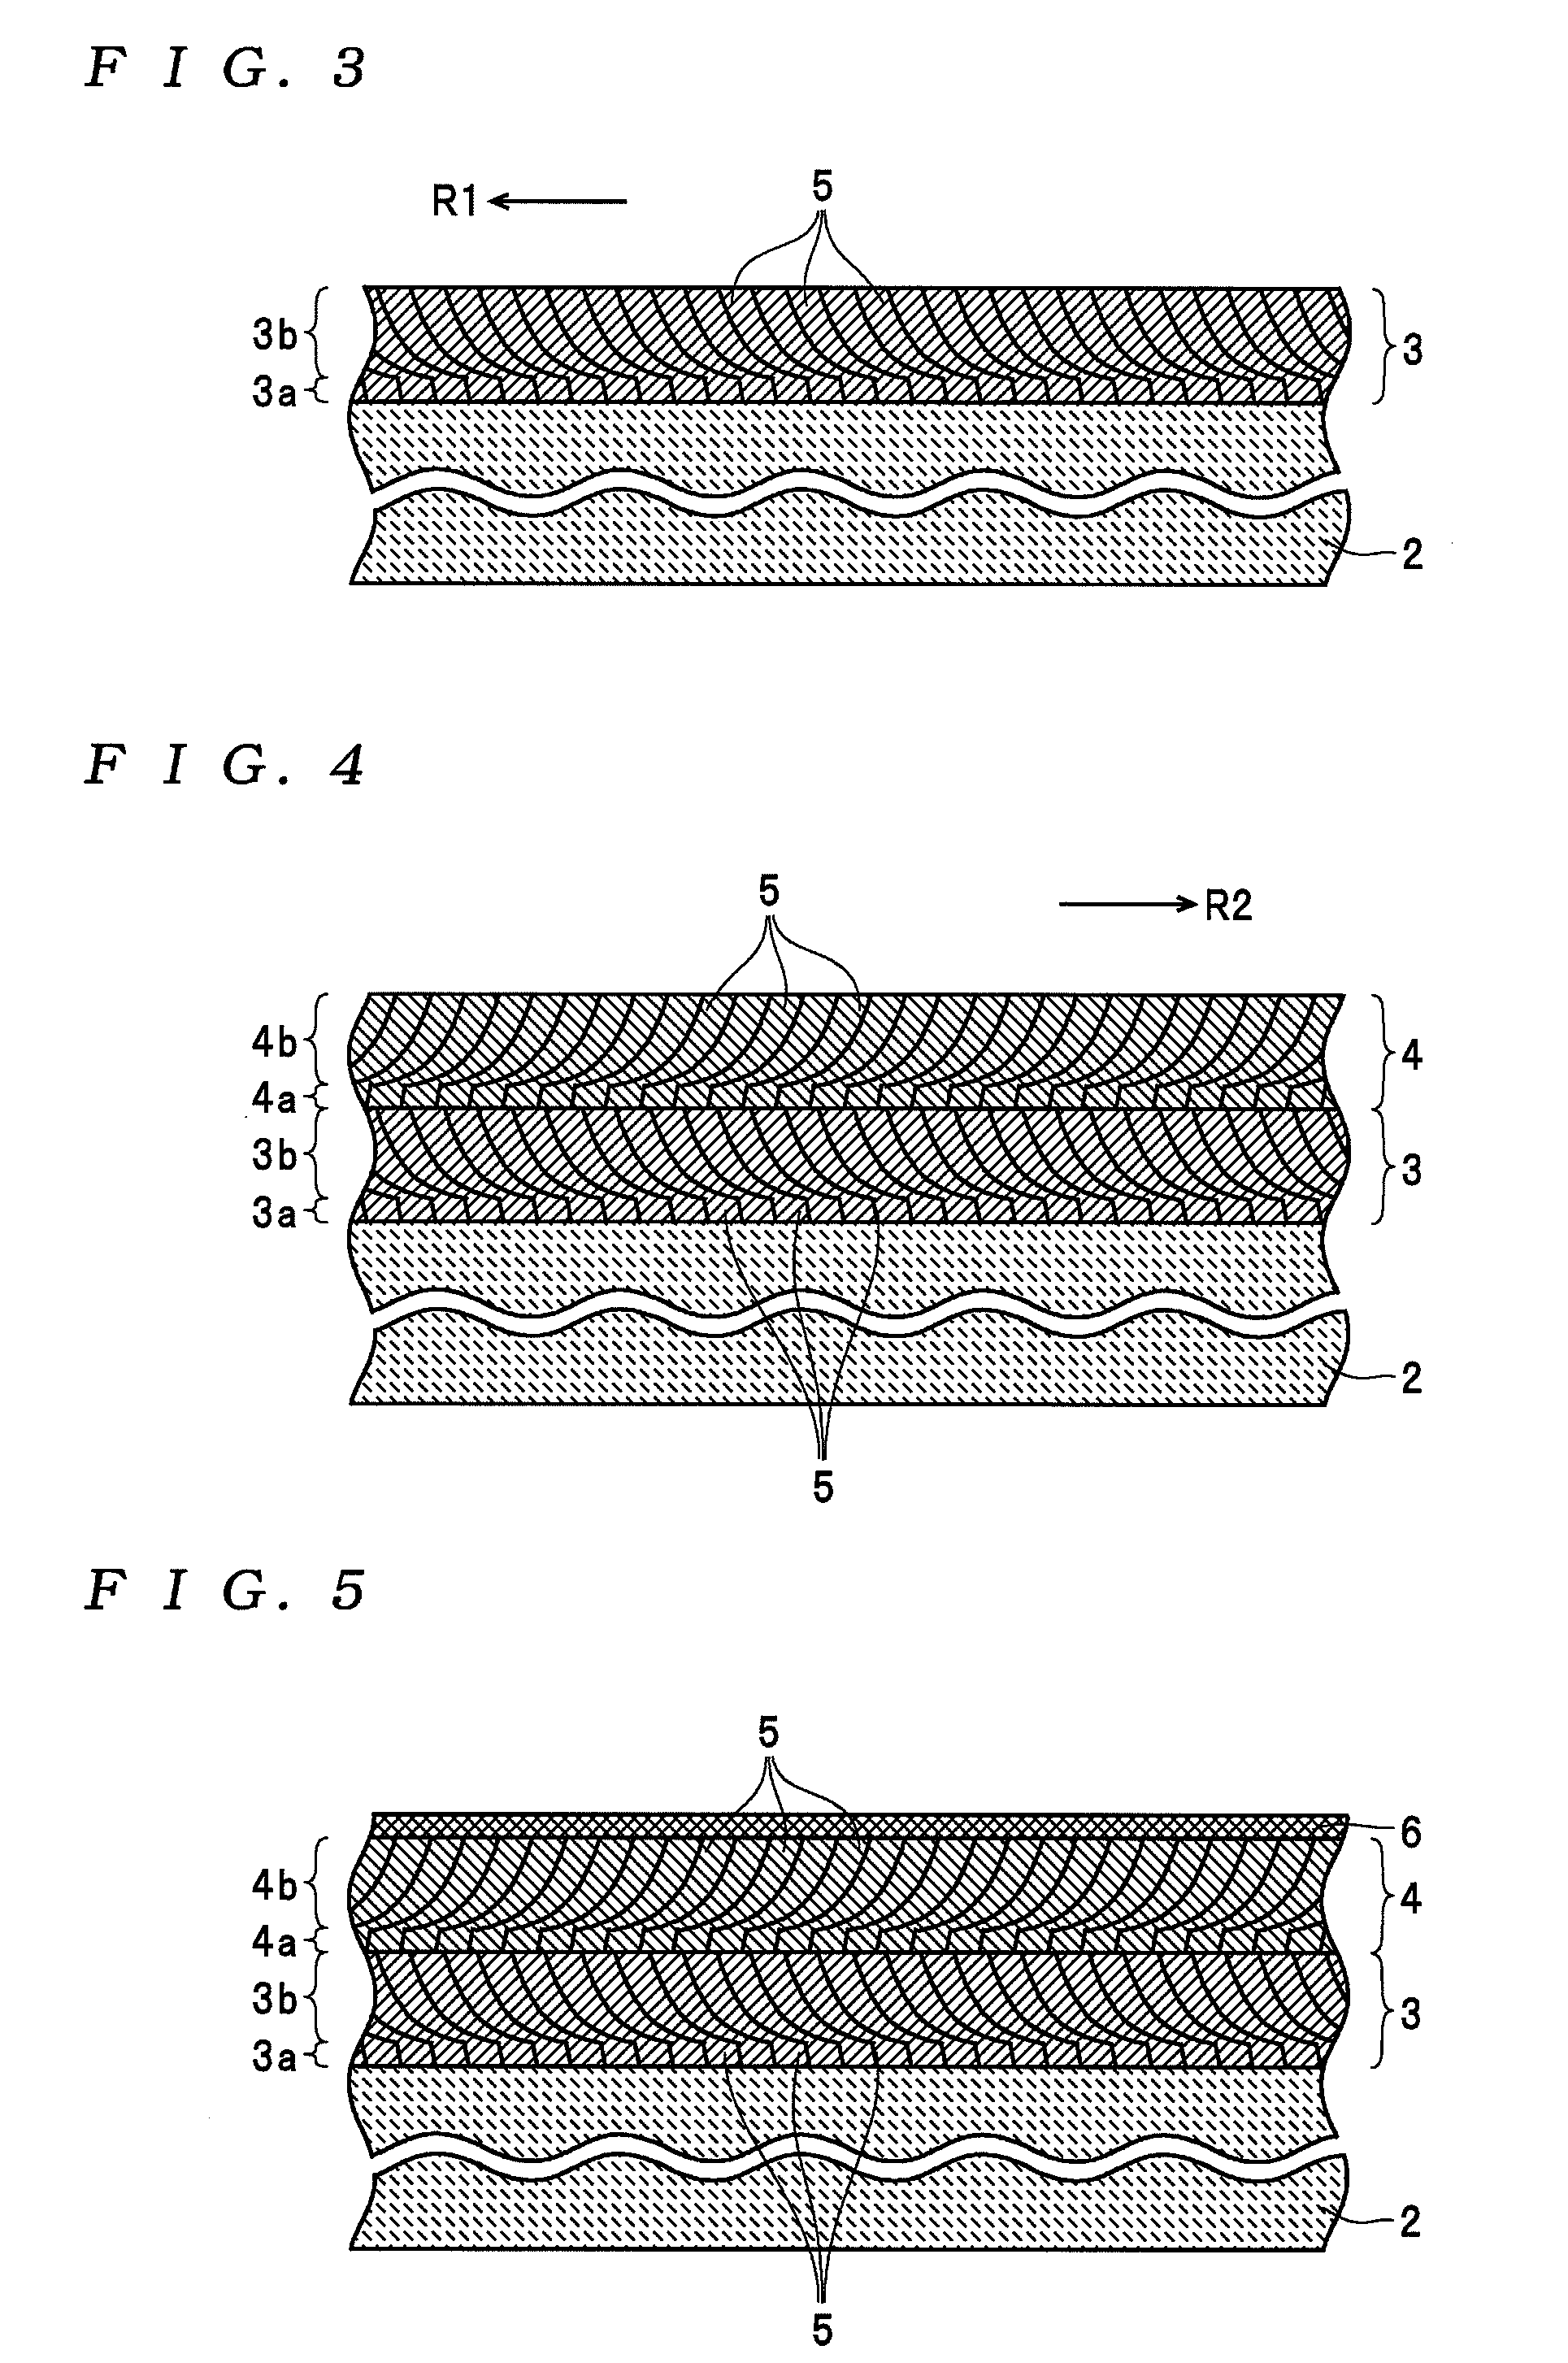 Magnetic recording medium, magnetic recording medium manufacturing apparatus, and method of manufacturing a magnetic recording medium